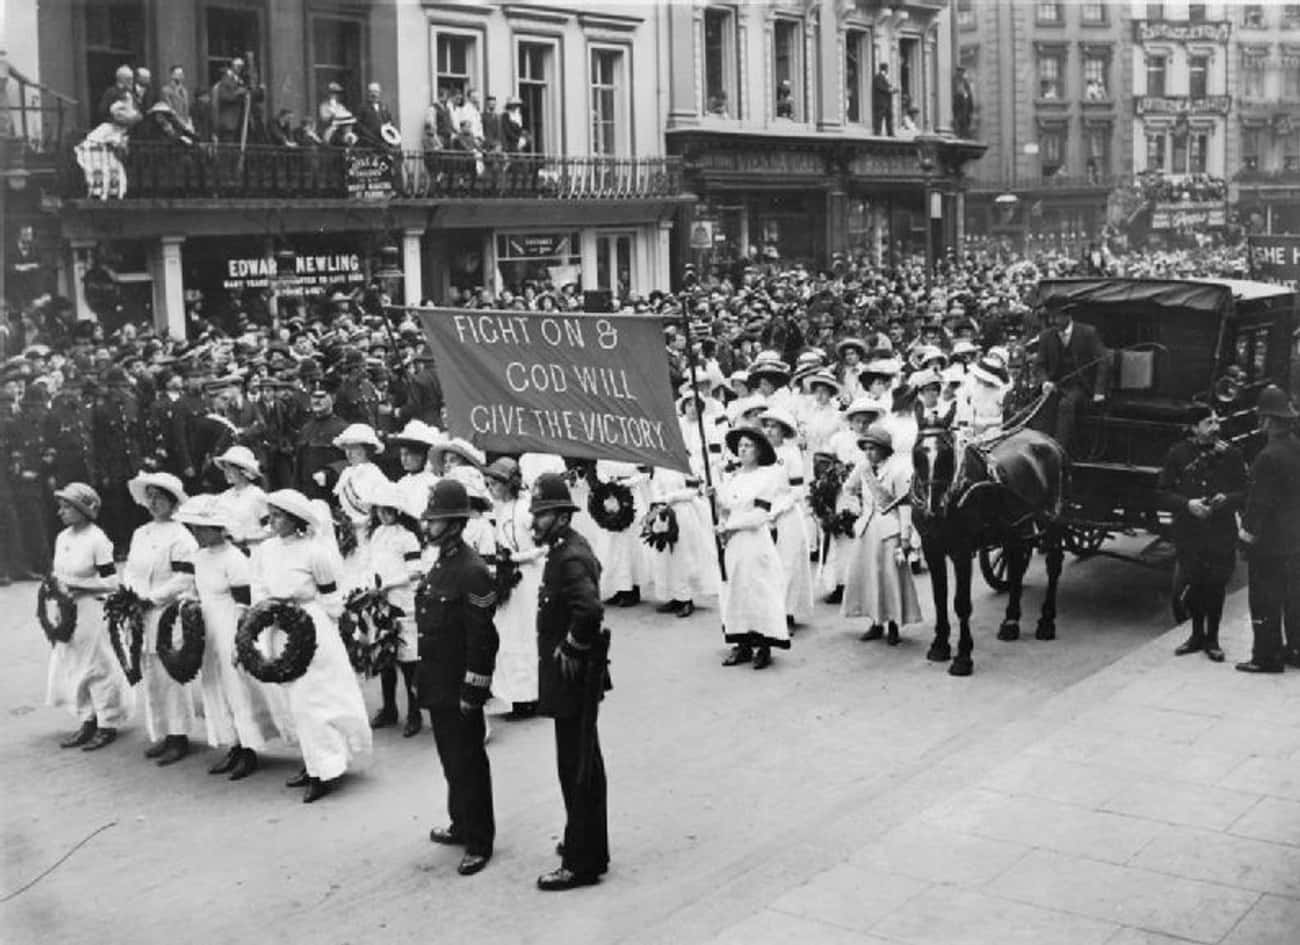 Davison&#39;s Death Catapulted Her To Martyrdom And The Suffragettes Organized A Huge Public Funeral To Honor Their Fallen Sister